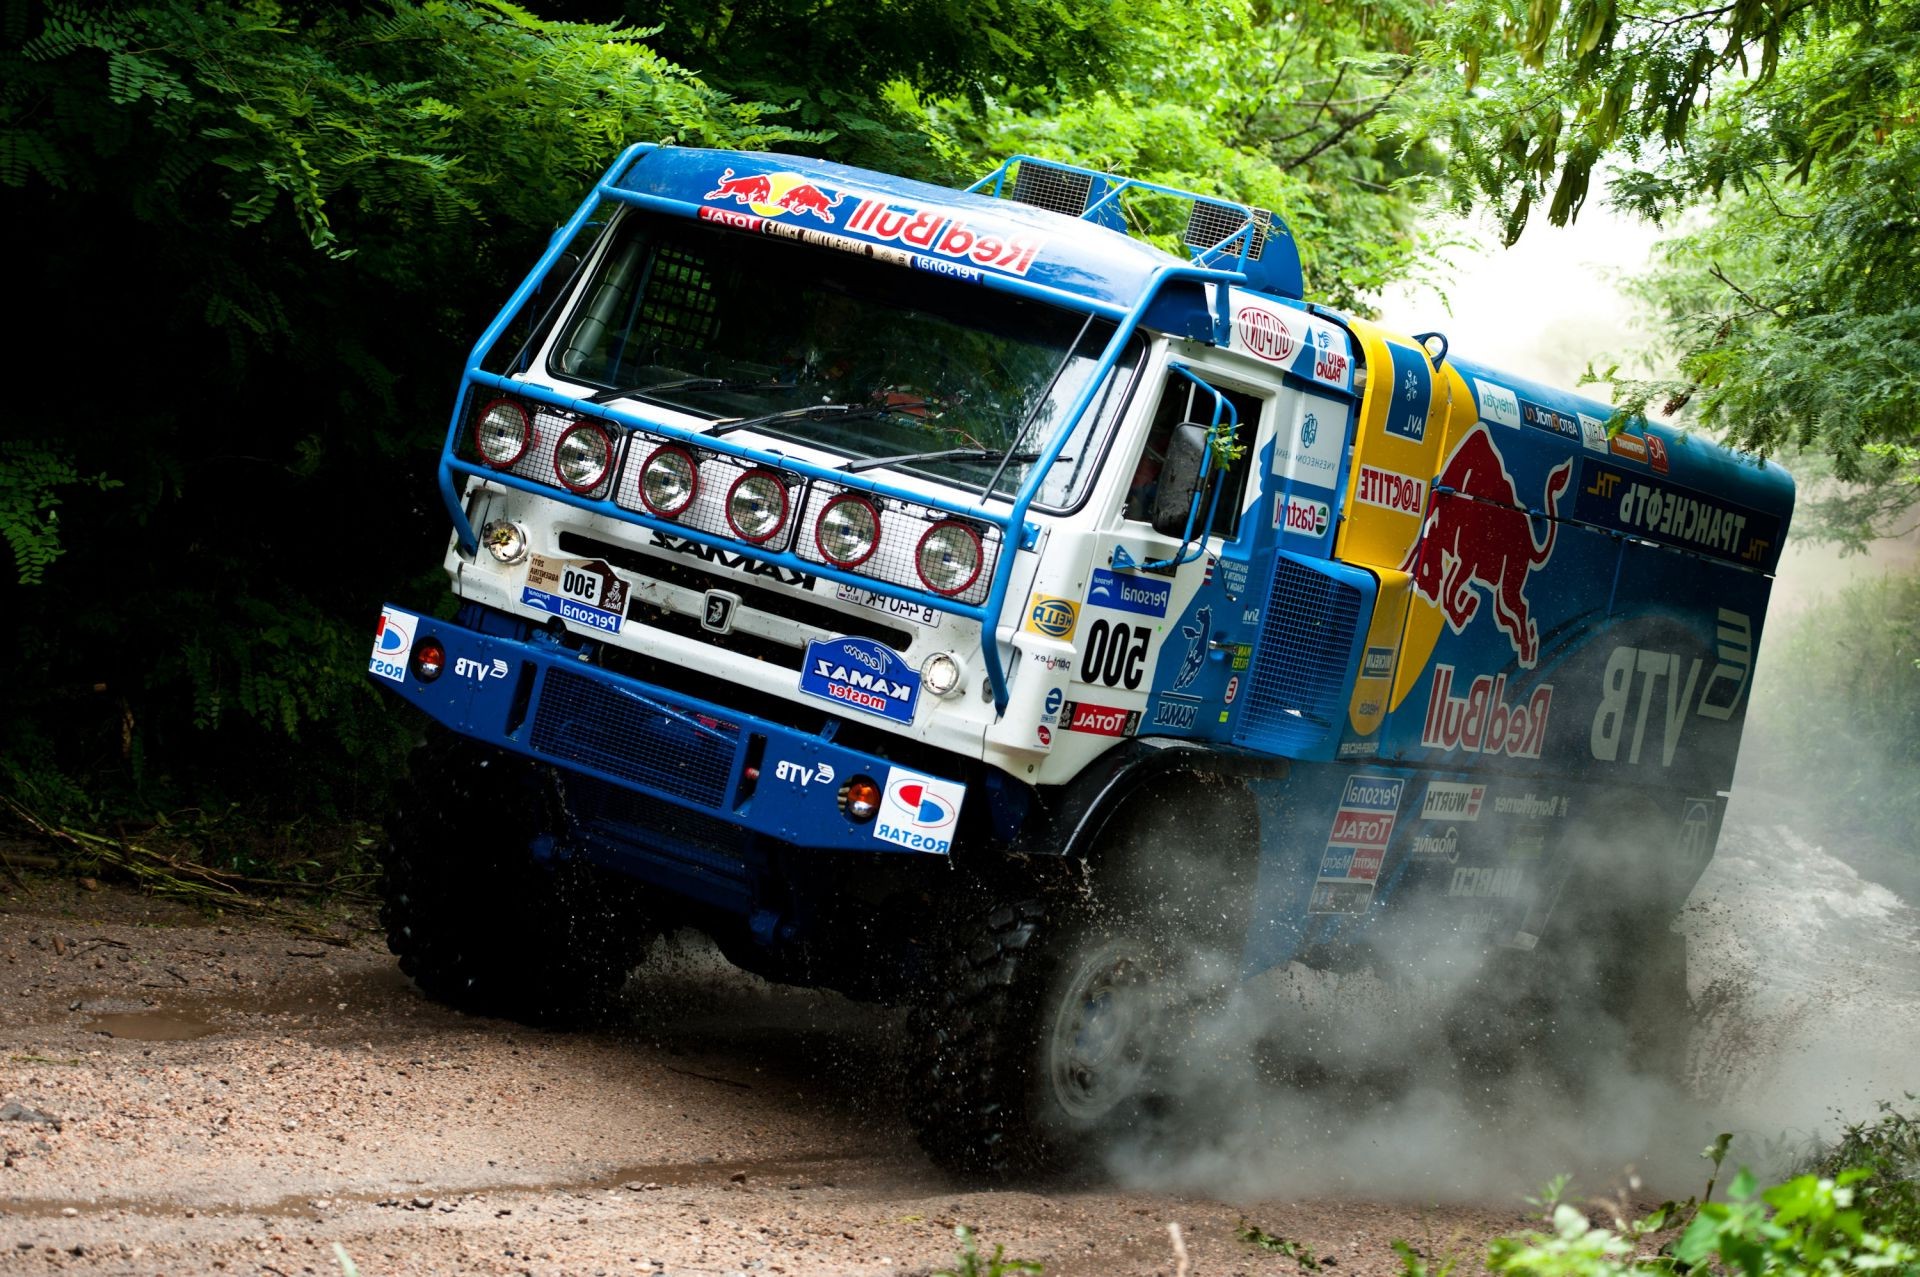 trucks rally vehicle race car competition hurry championship truck road fast transportation system action drive driver track dust